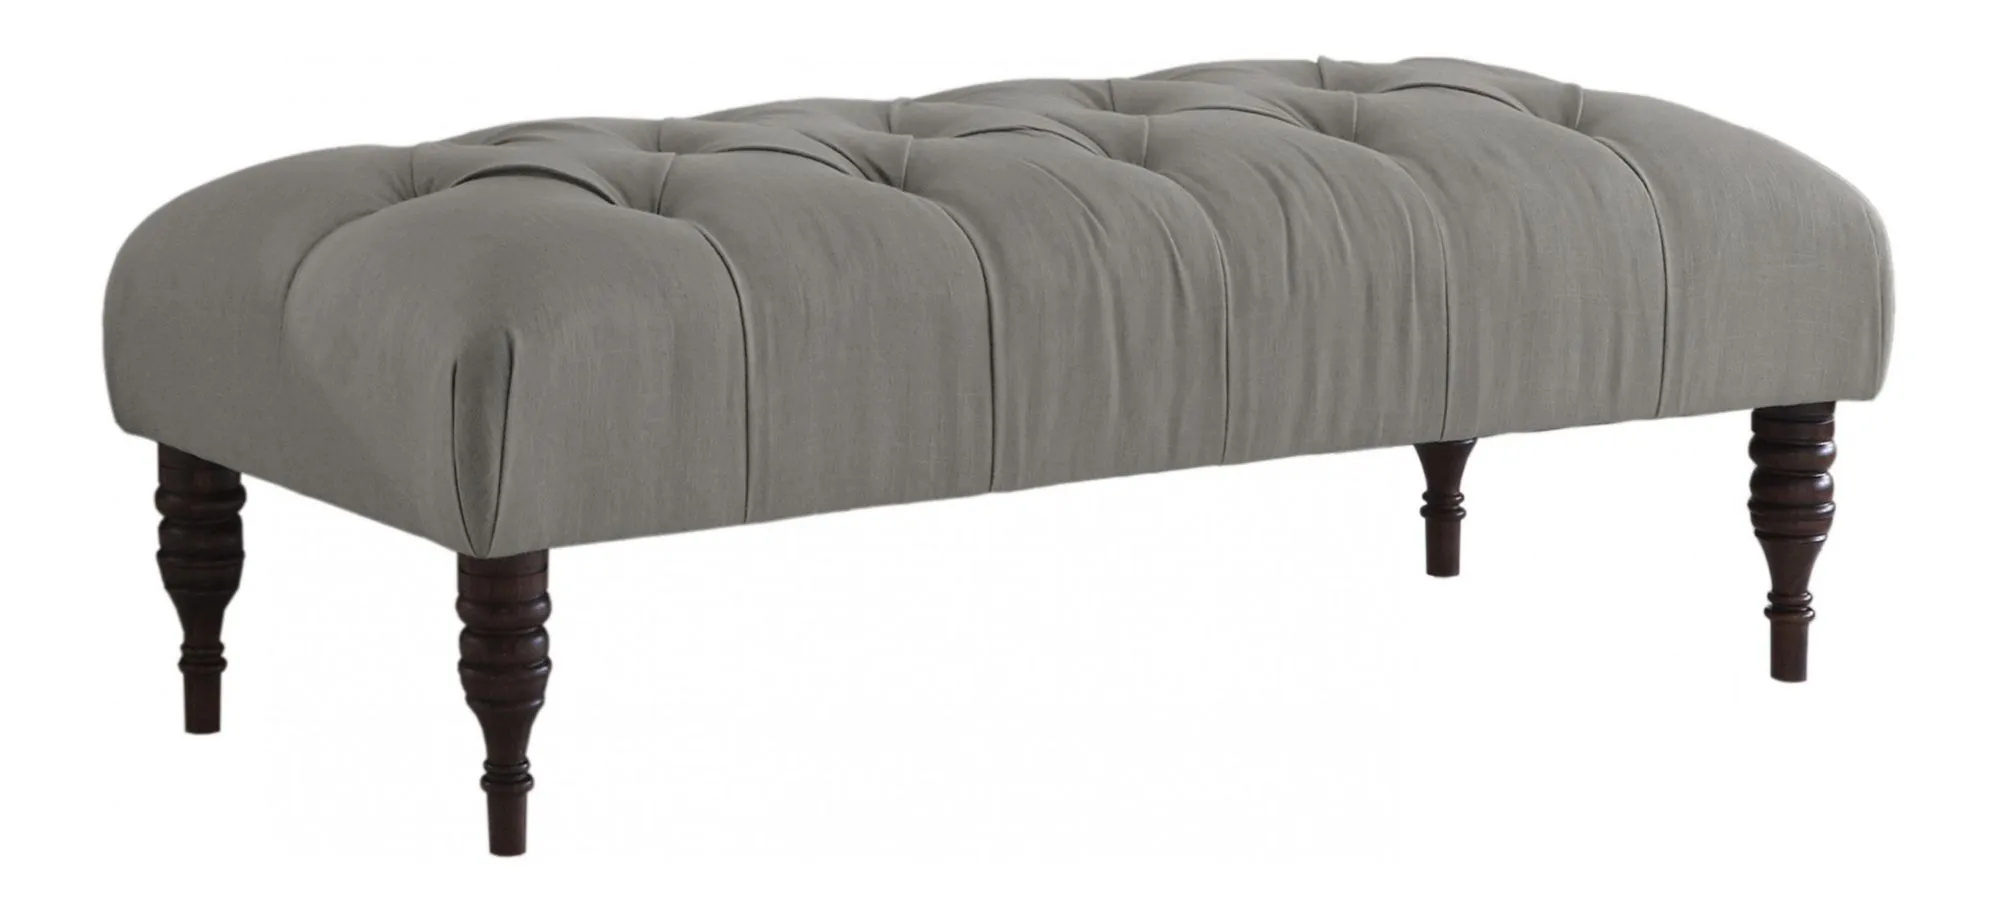 Banks Bench in Linen Gray by Skyline